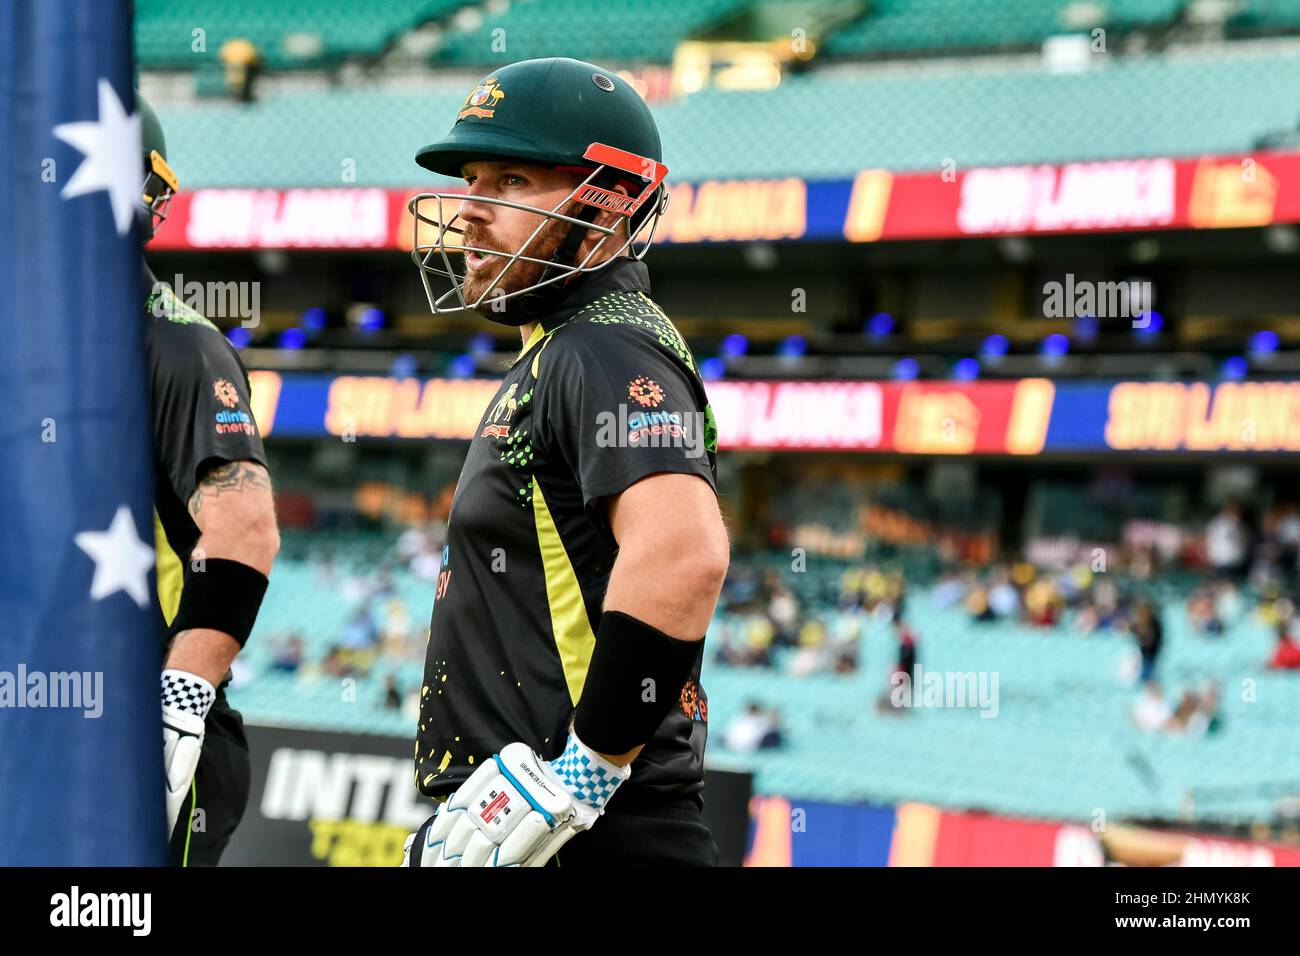 Sydney, Australia. 13th Feb, 2022. Aaron Finch of Australia prior to start of game two in the T20 International series between Australia and Sri Lanka at Sydney Cricket Ground on February 13, 2022 in Sydney, Australia. (Editorial use only) Credit: Izhar Ahmed Khan/Alamy Live News/Alamy Live News Stock Photo